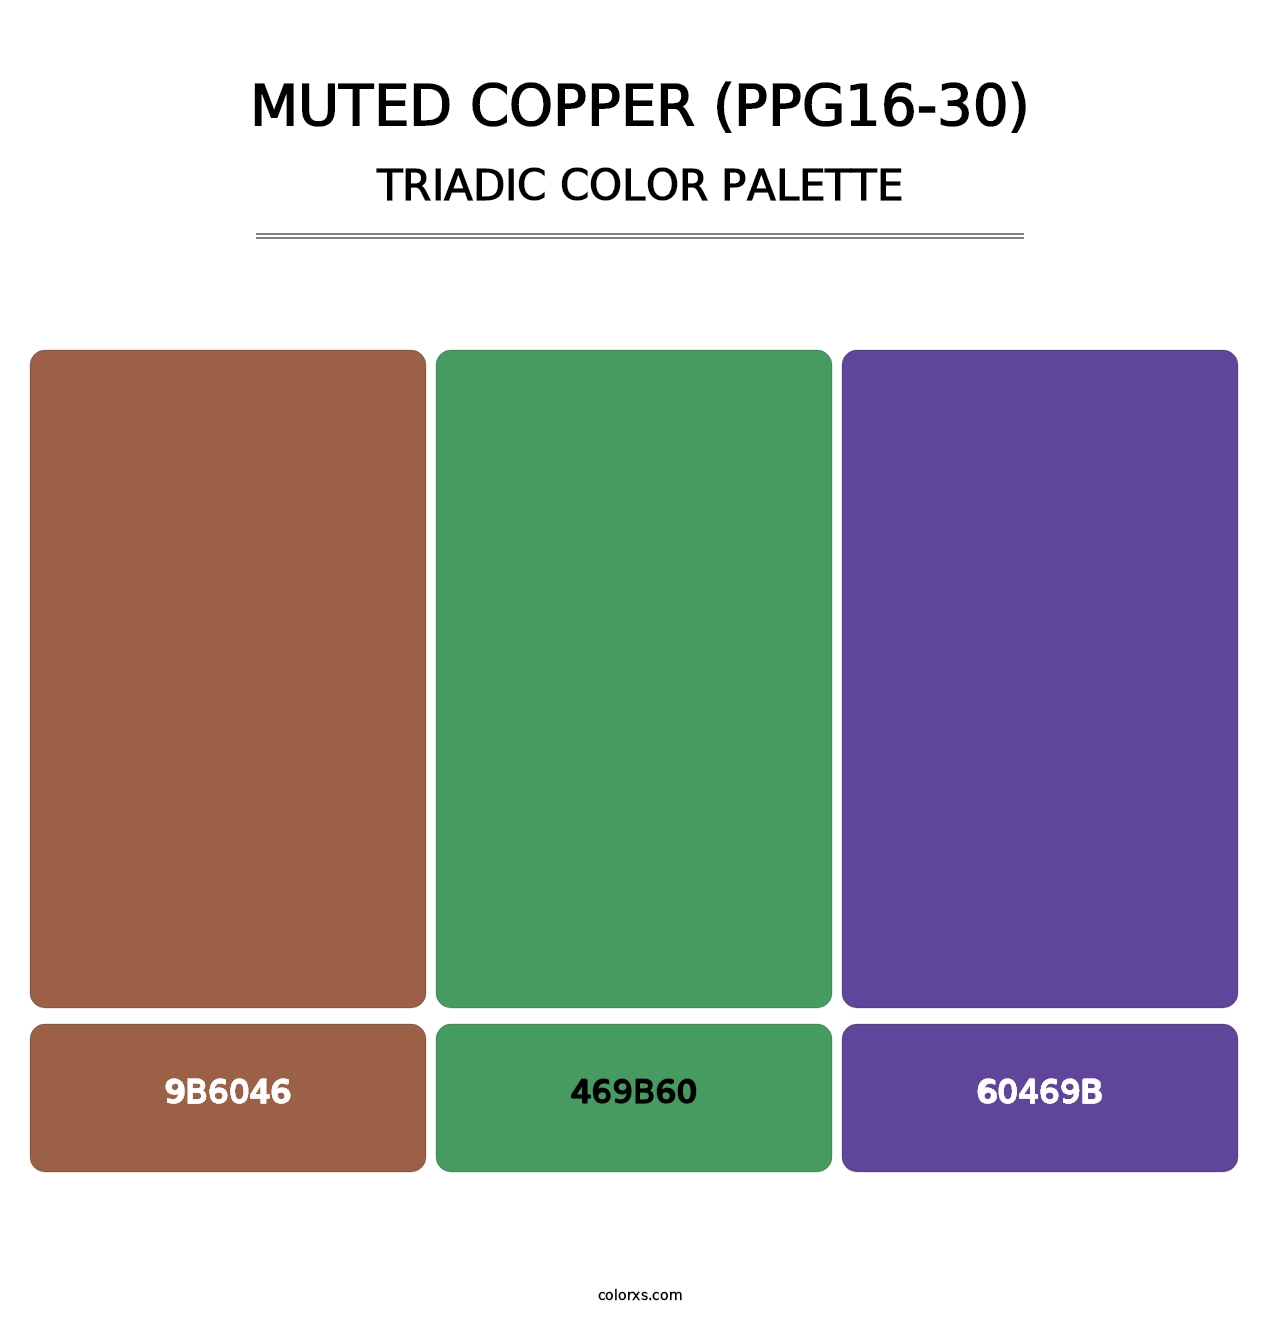 Muted Copper (PPG16-30) - Triadic Color Palette